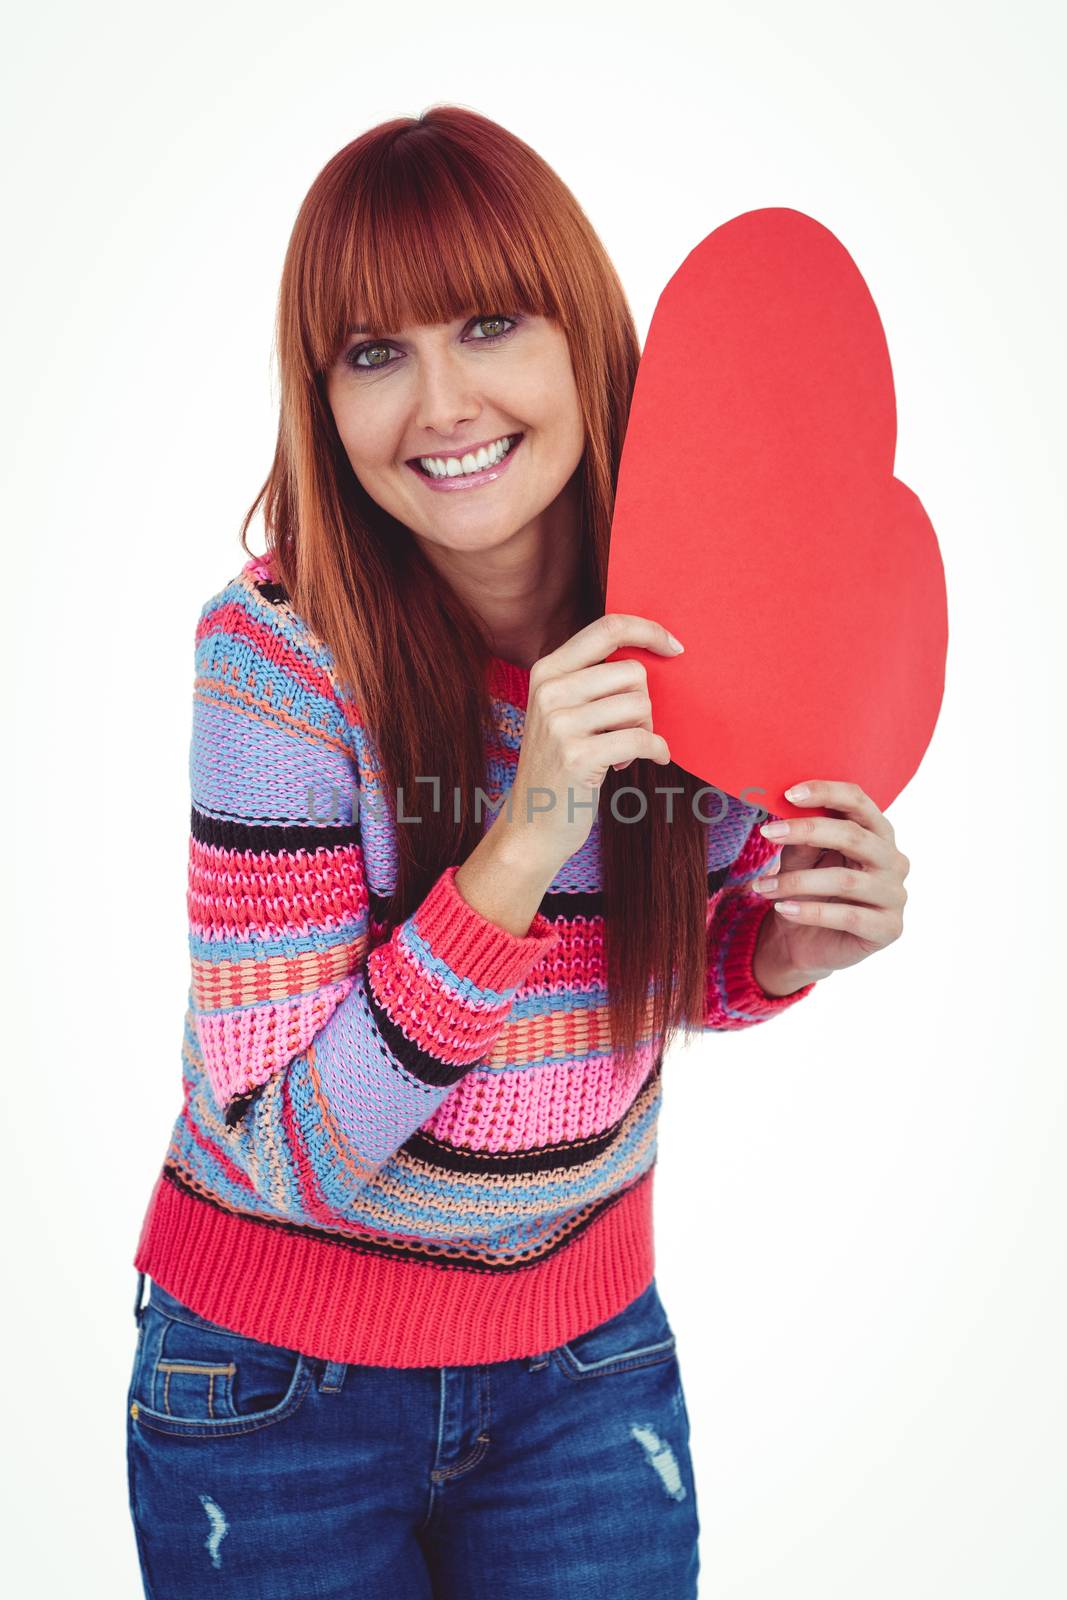 Smiling hipster woman holding a red heart against white background